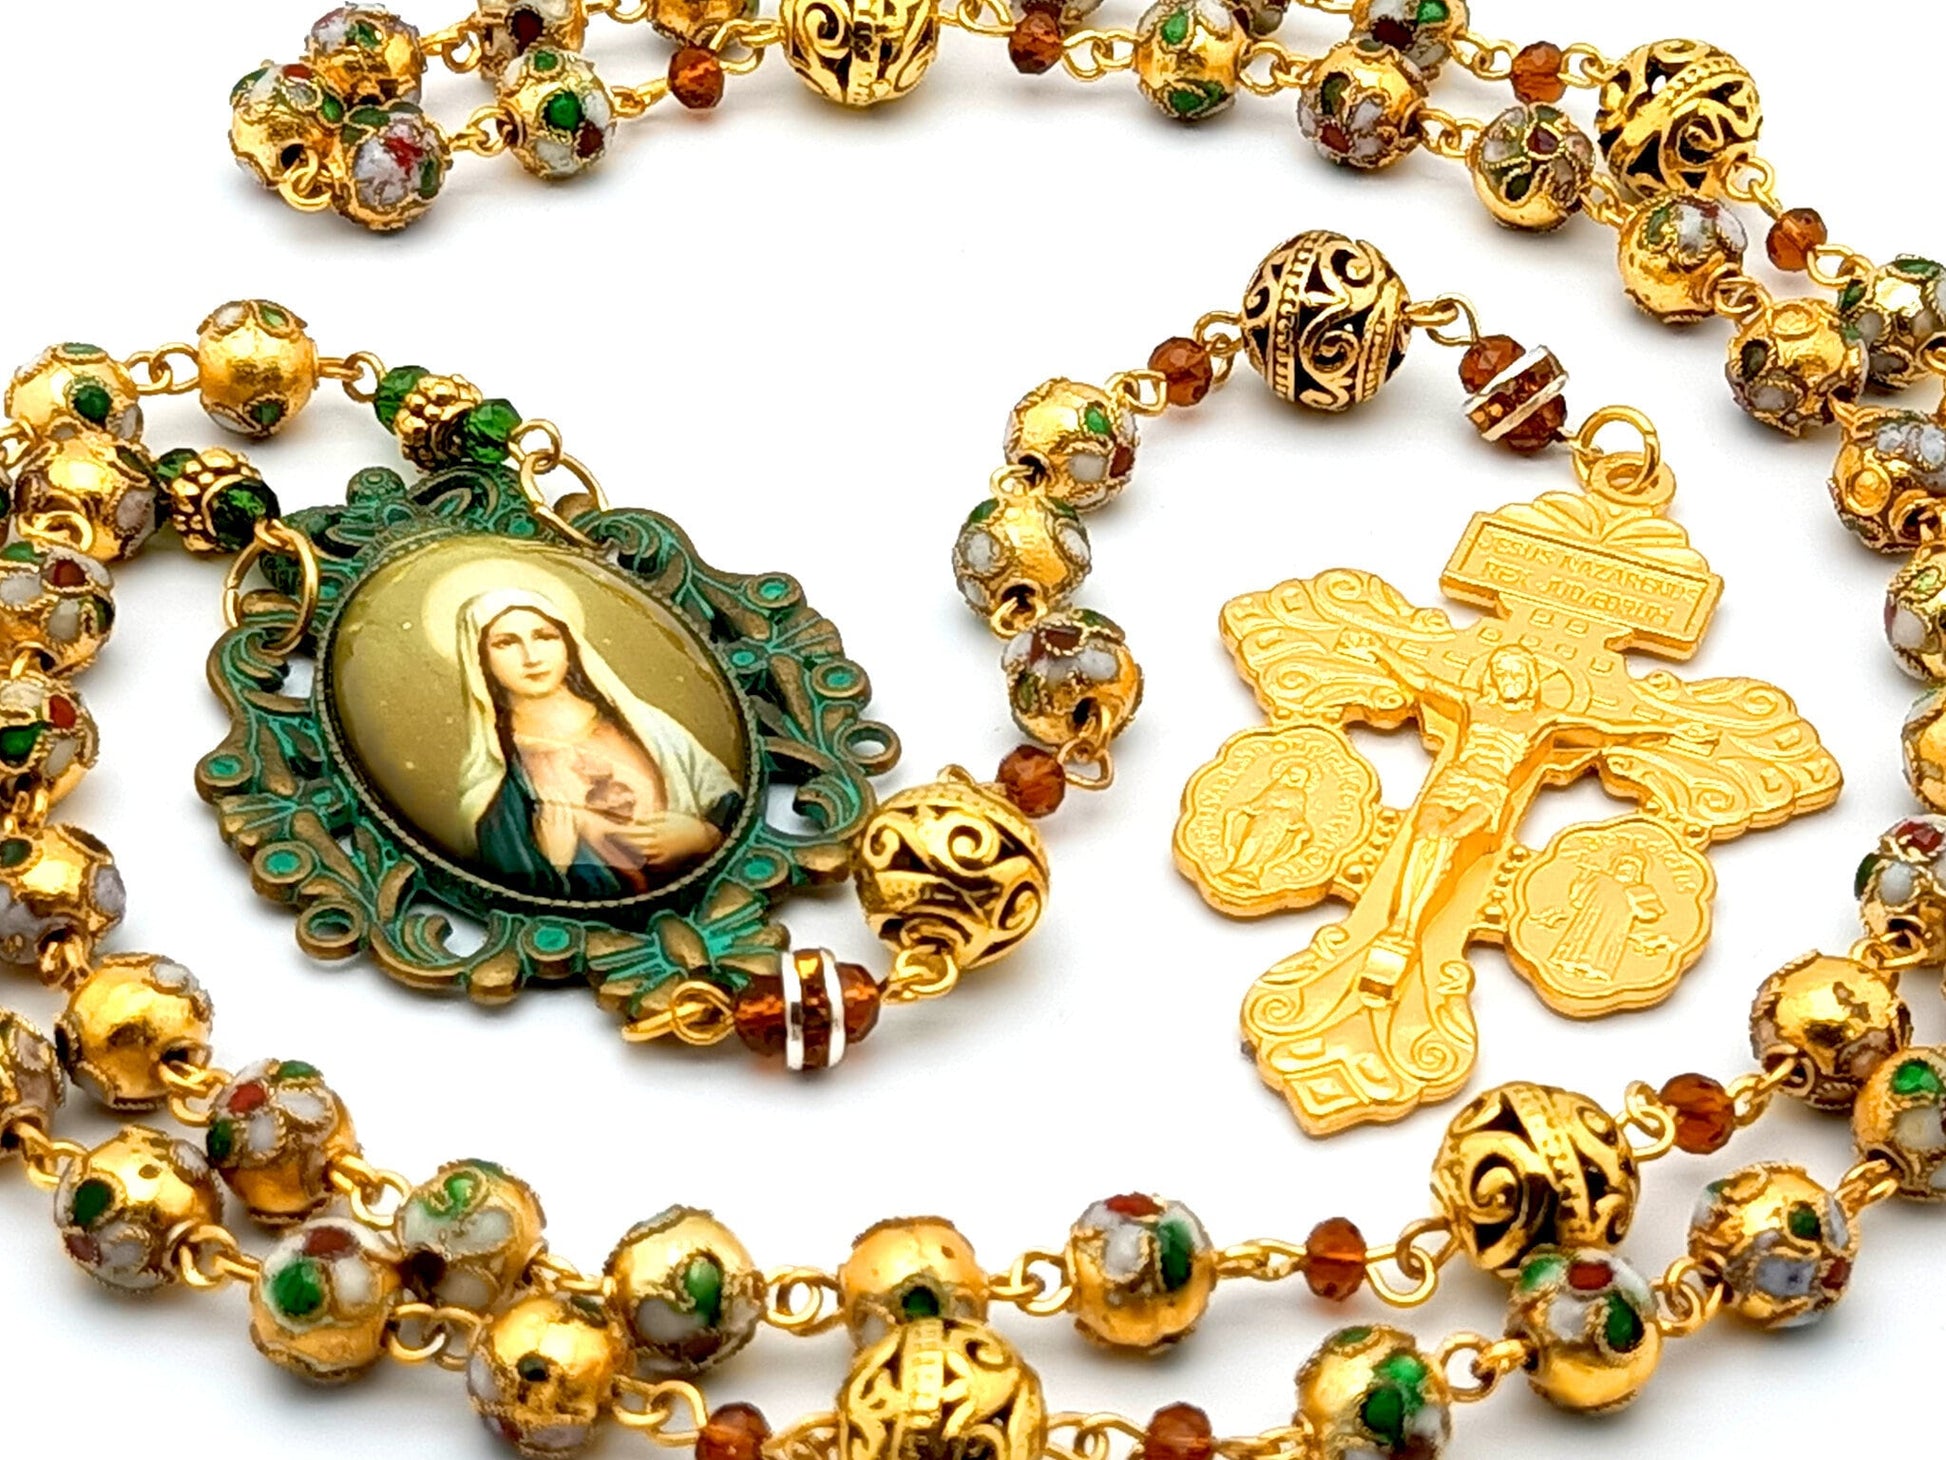 Immaculate Heart of Mary unique rosary beads with cloisonne gold enamel beads, golden double sided pardon crucifix and verdigris picture centre medal.